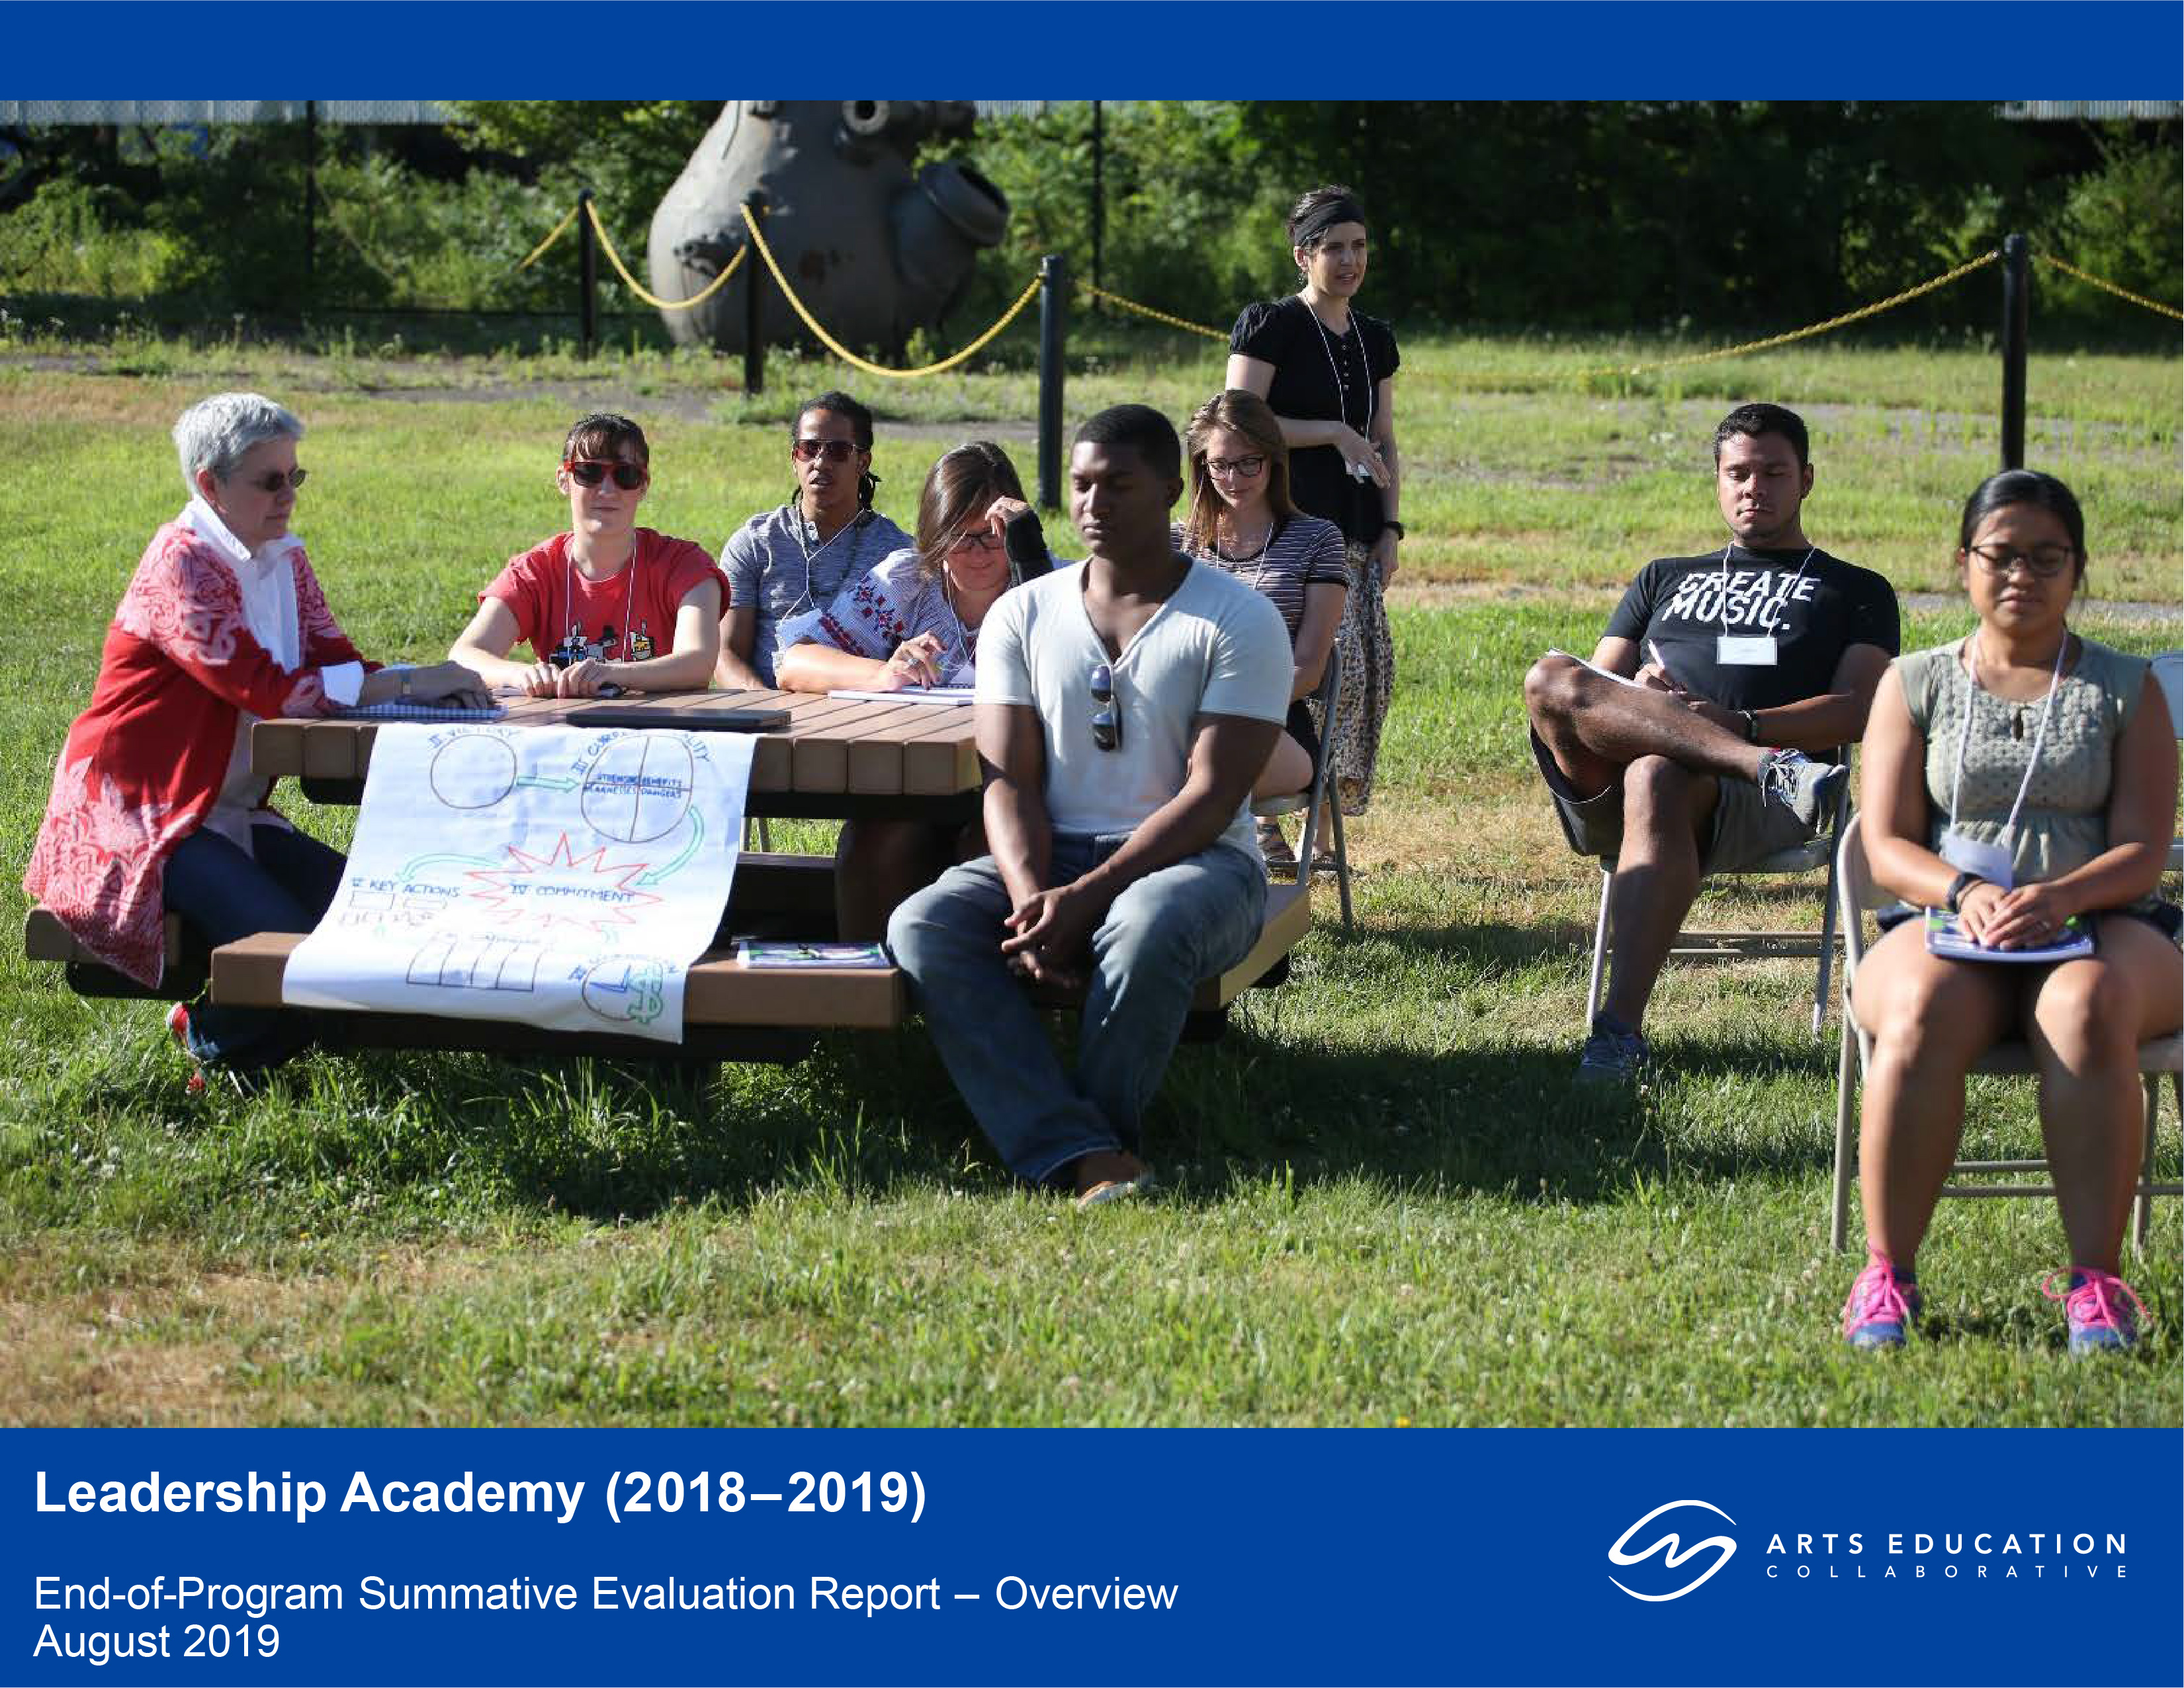 Cover of Leadership Academy evaluation report showing educators meditating outside.